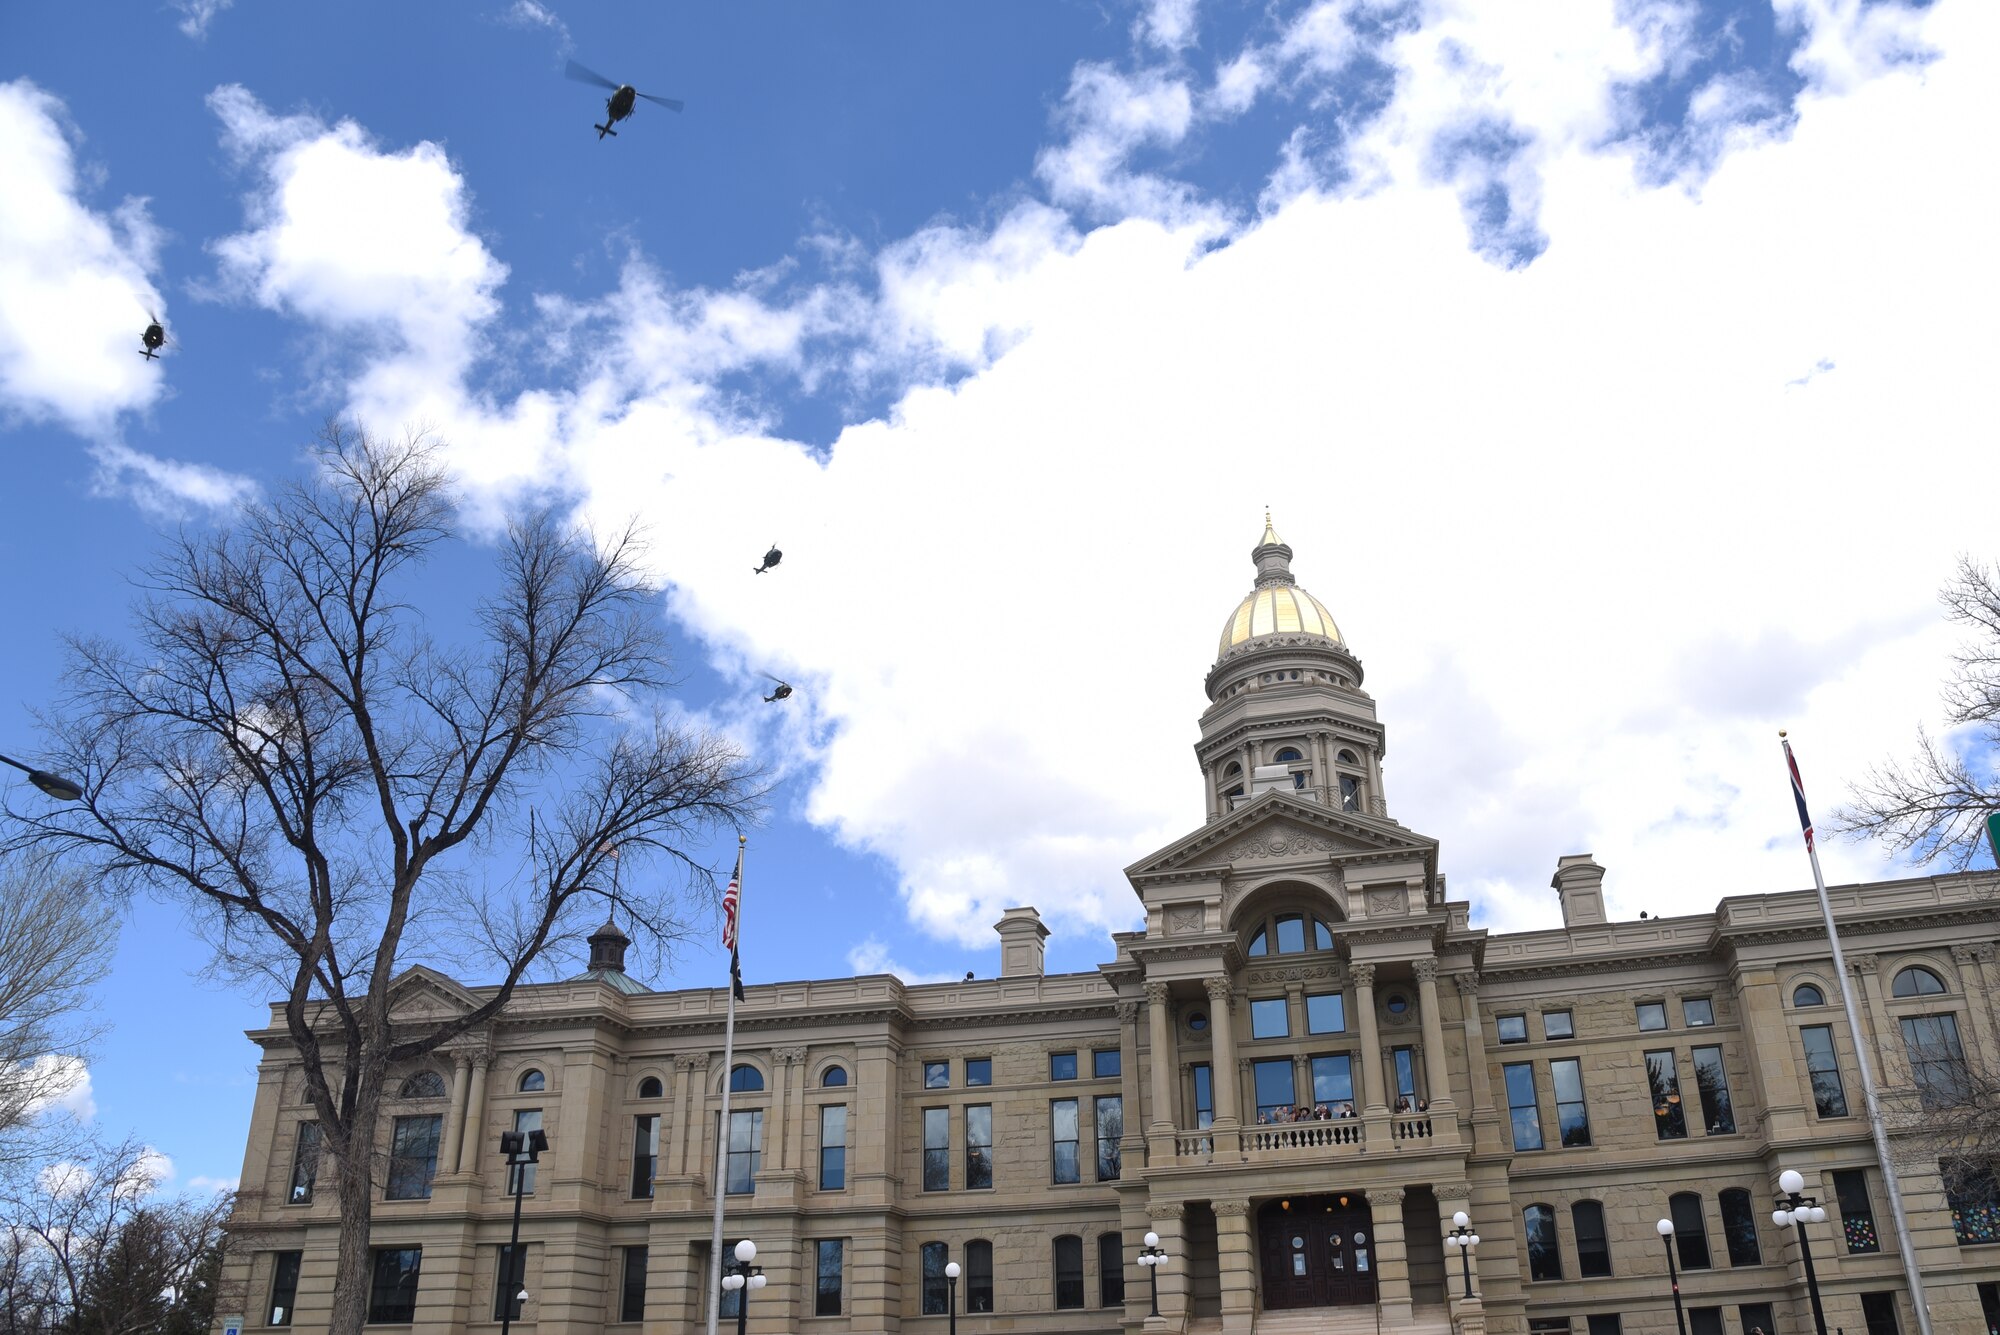 Hueys fly over state capitol